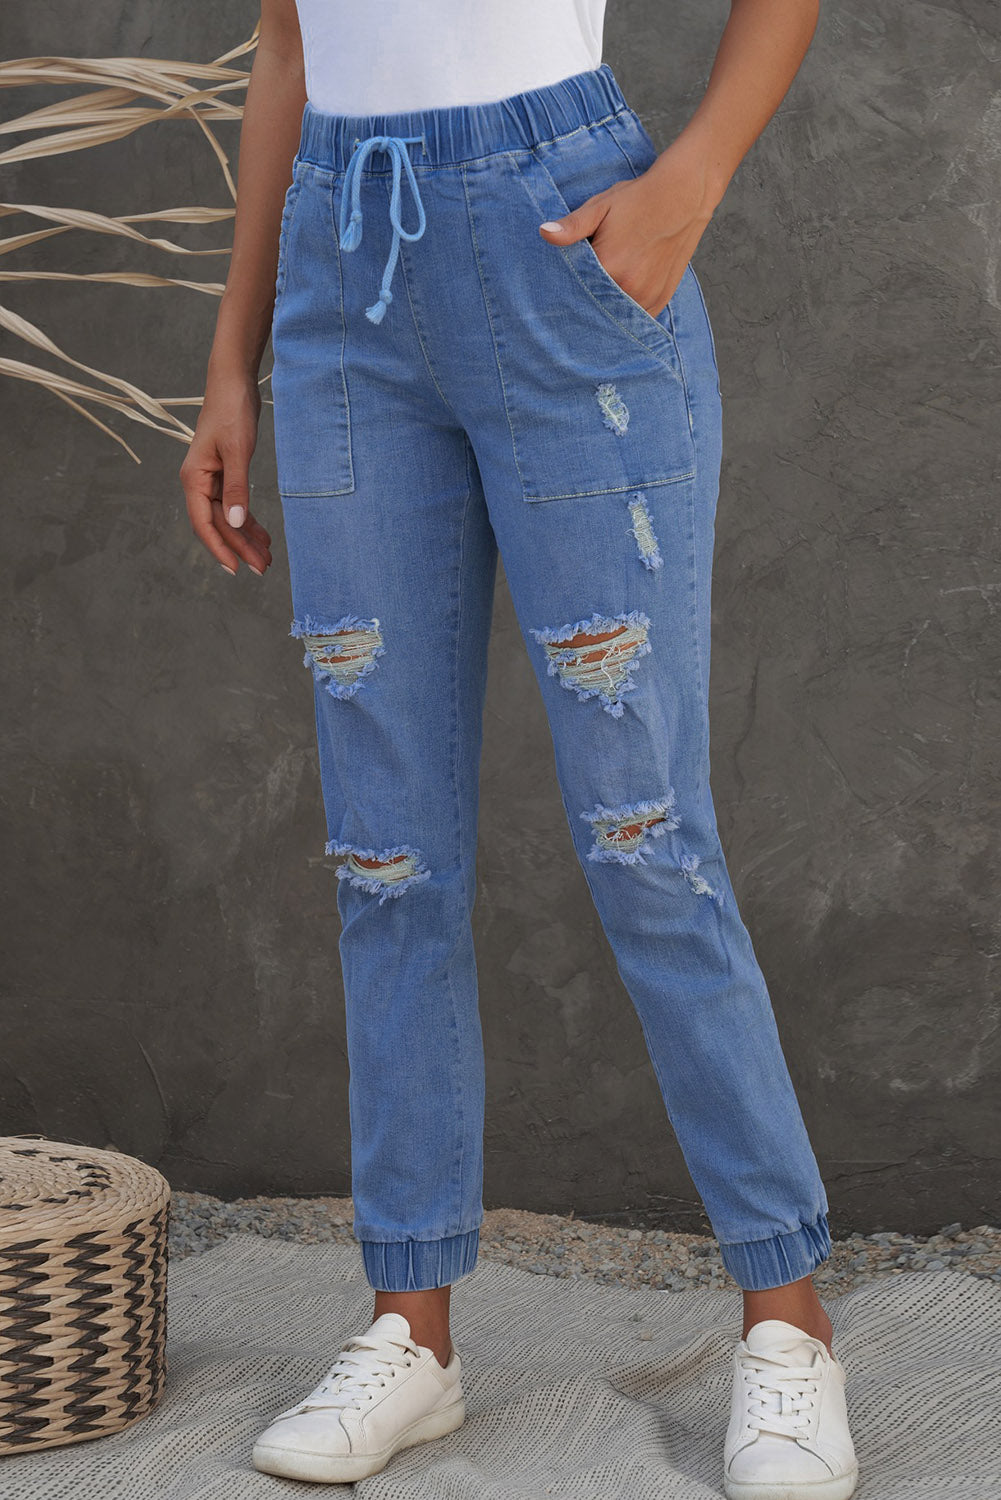 Sky Blue Pocketed Distressed Denim Joggers  Denim joggers, Denim pants  women, Distressed denim